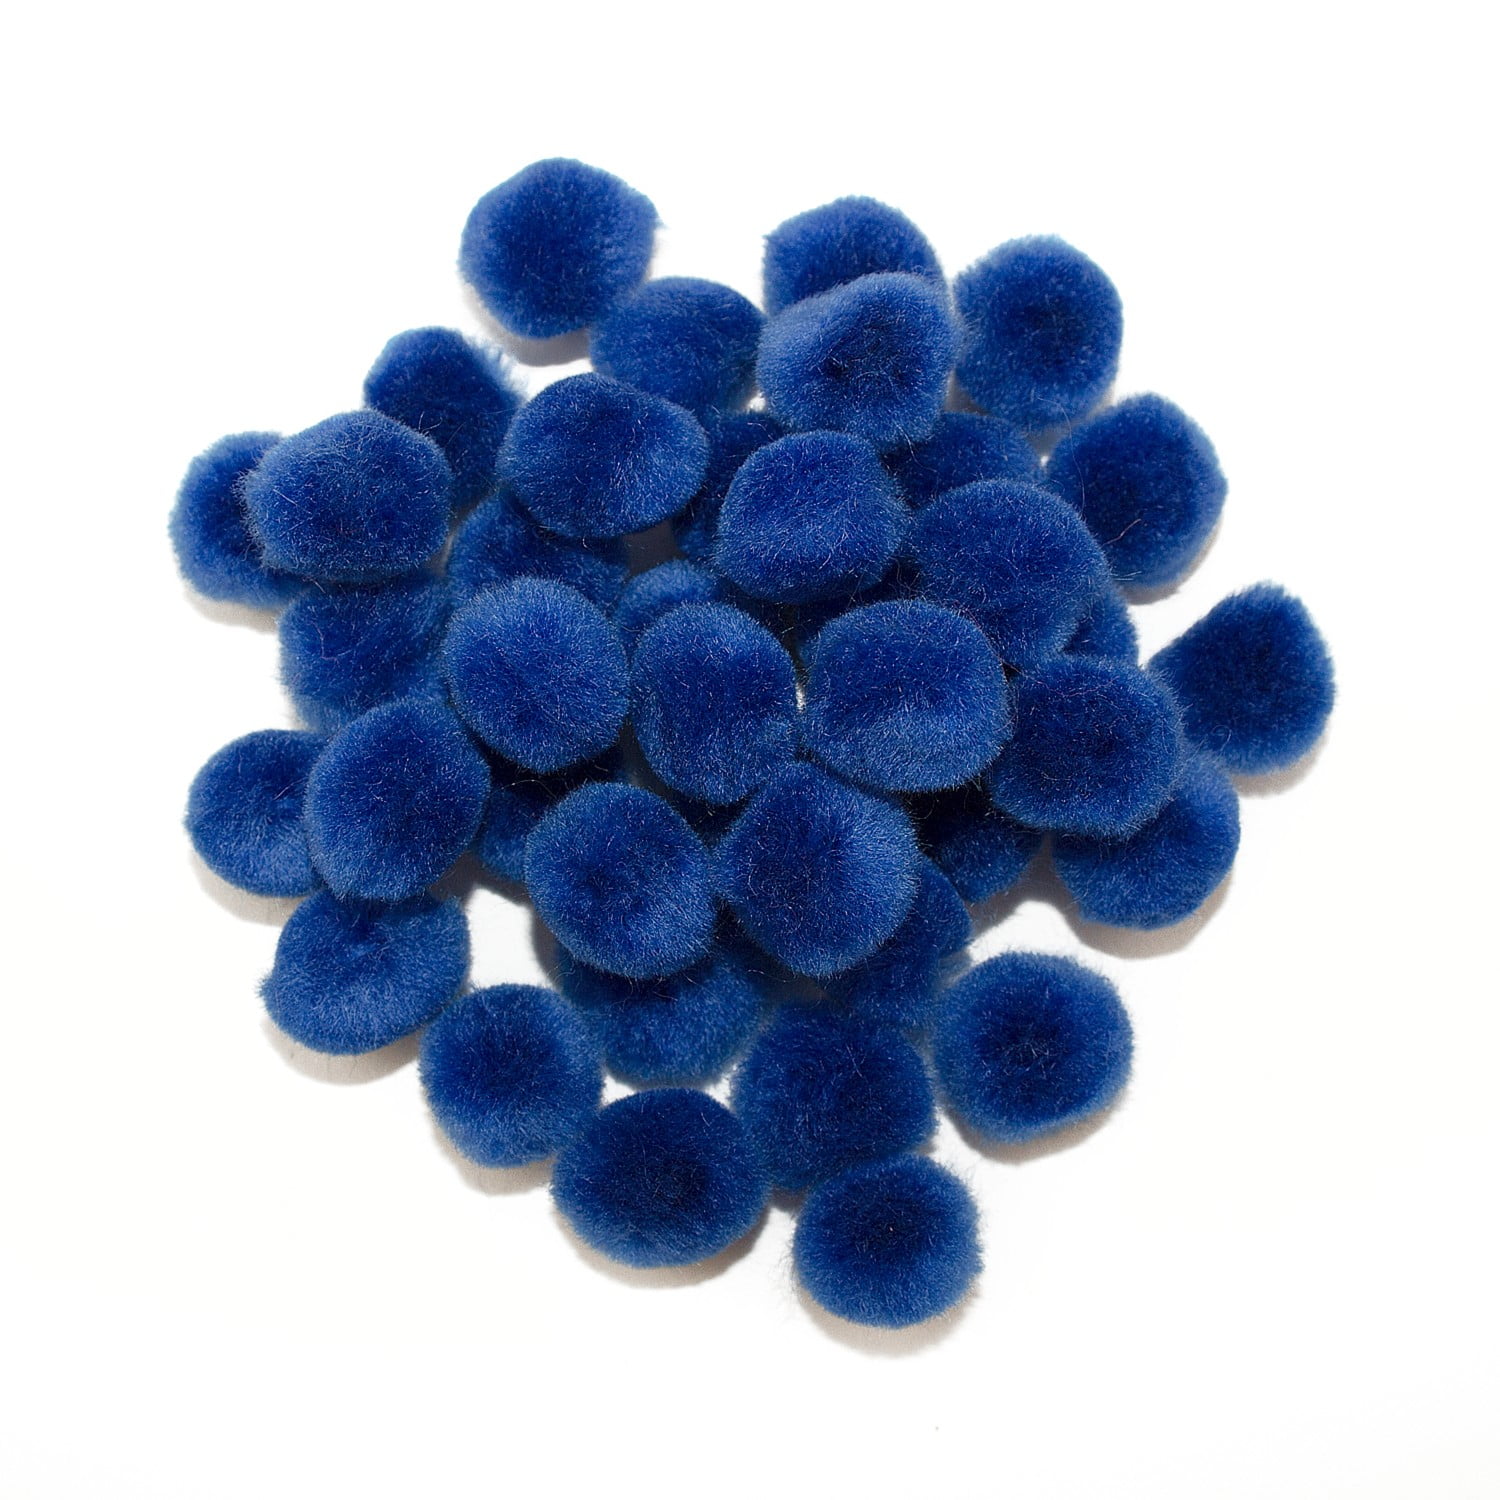  2.5 Inch Royal Blue Large Craft Pom Poms 15 Pieces : Arts,  Crafts & Sewing